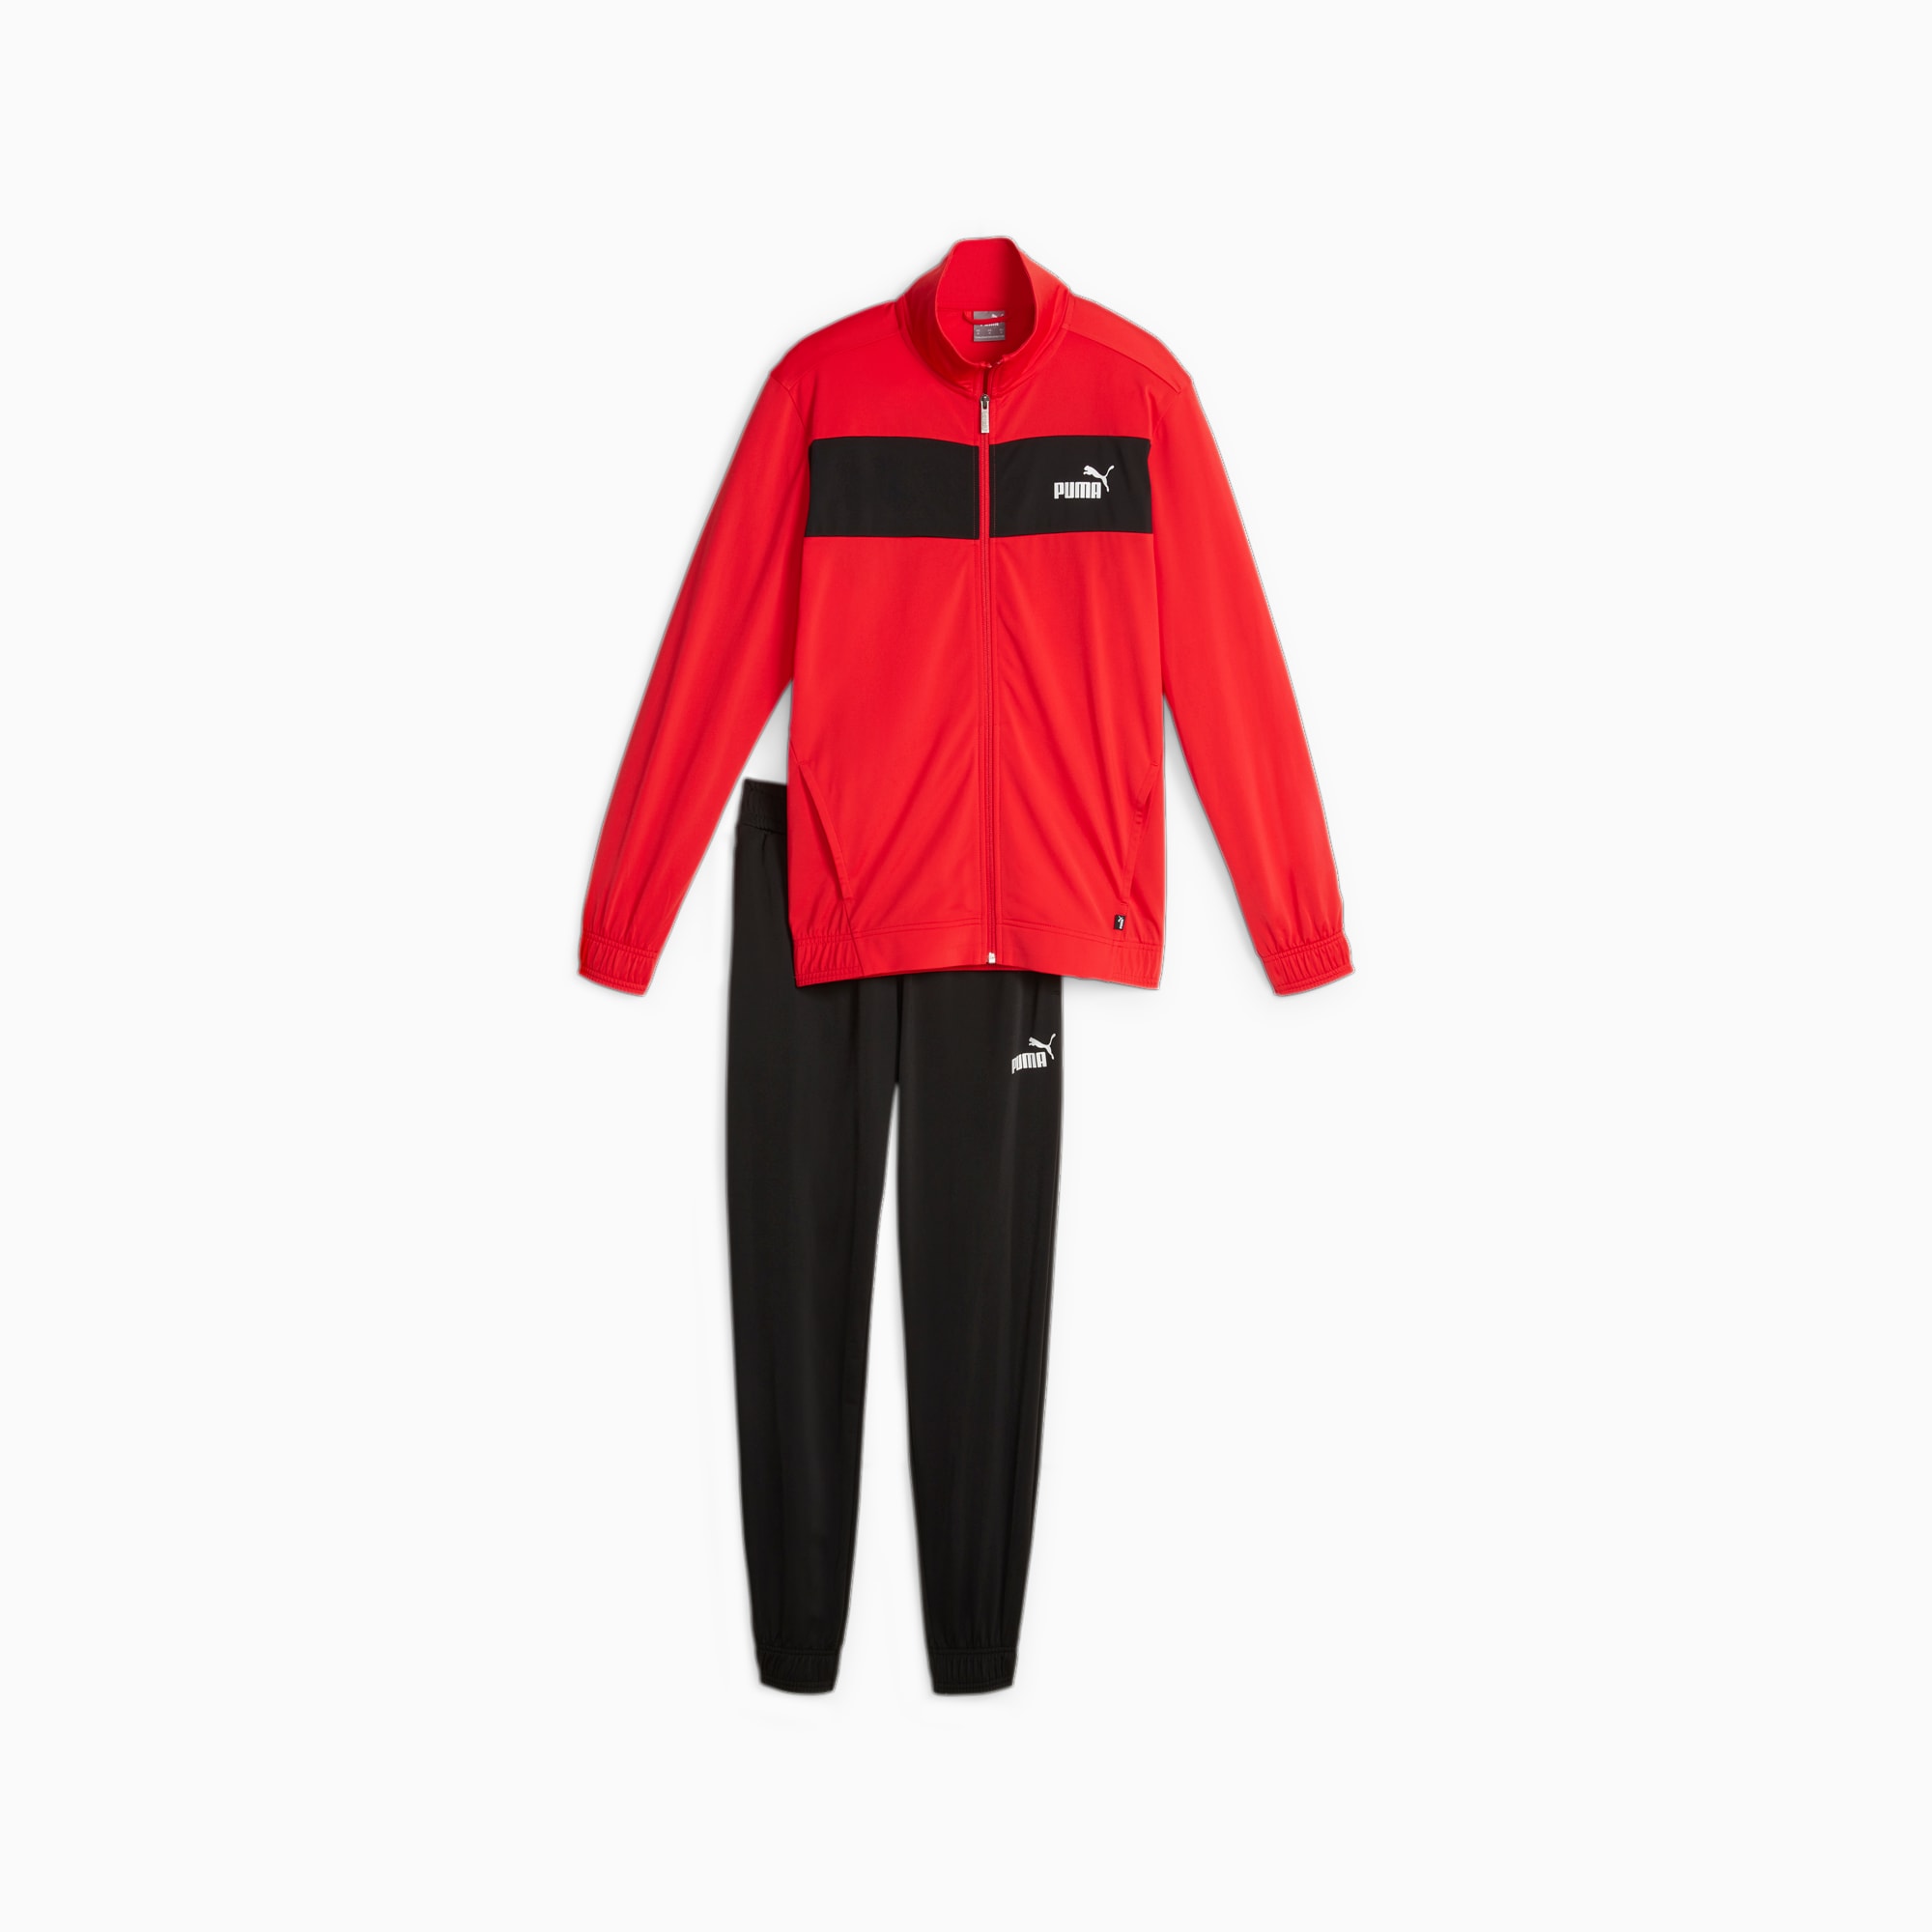 PUMA Men's Poly Tracksuit, For All Time Red, Size 3XL, Clothing